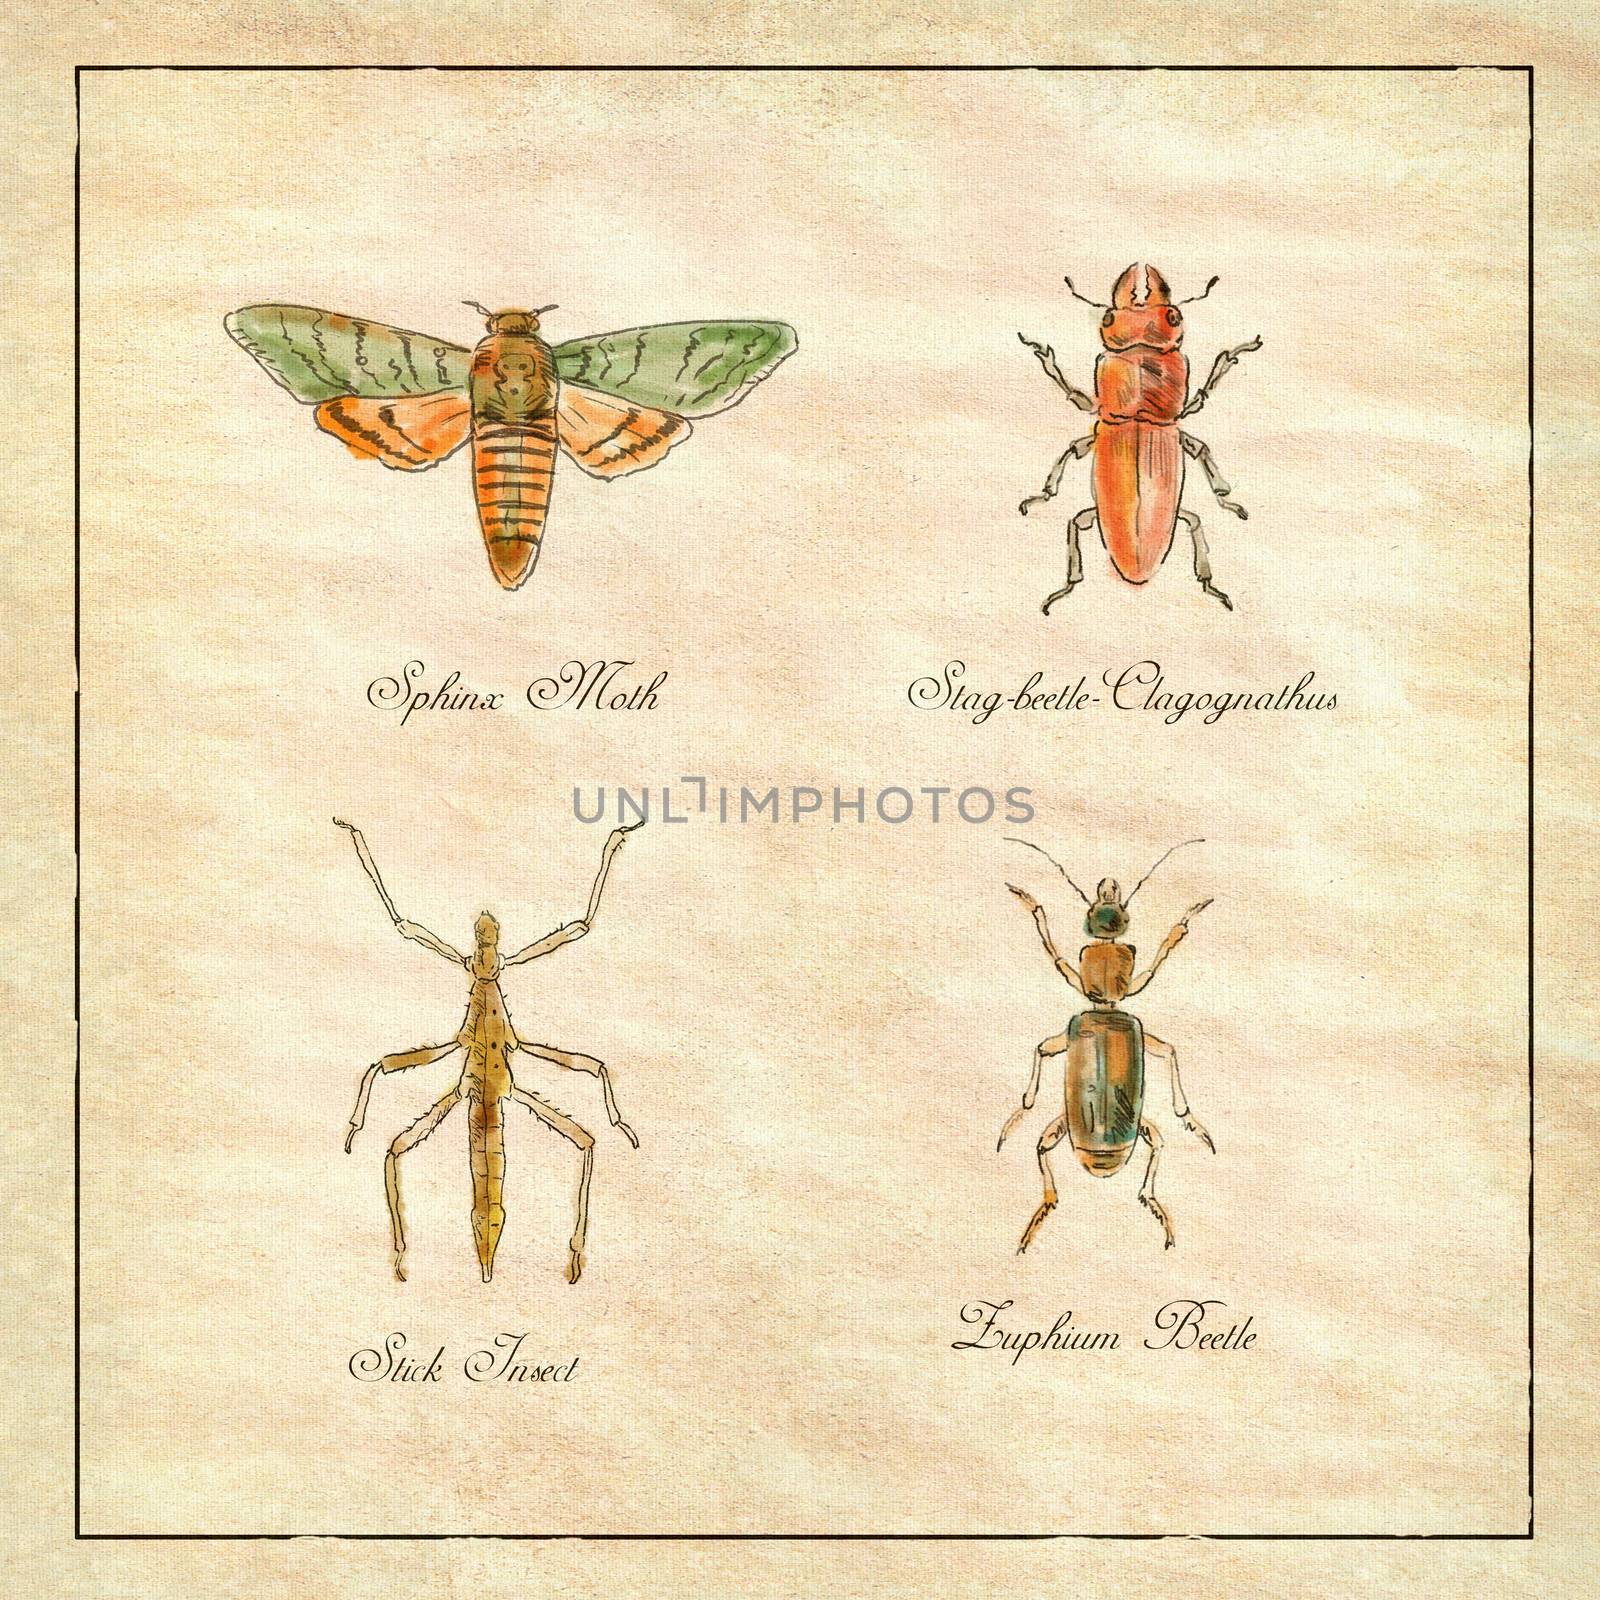 Vintage Victorian drawing illustration of a collection of insects like the Sphinx Moth, Stag beetle, Stick Insect and Zuphium Beetle on antique paper
.